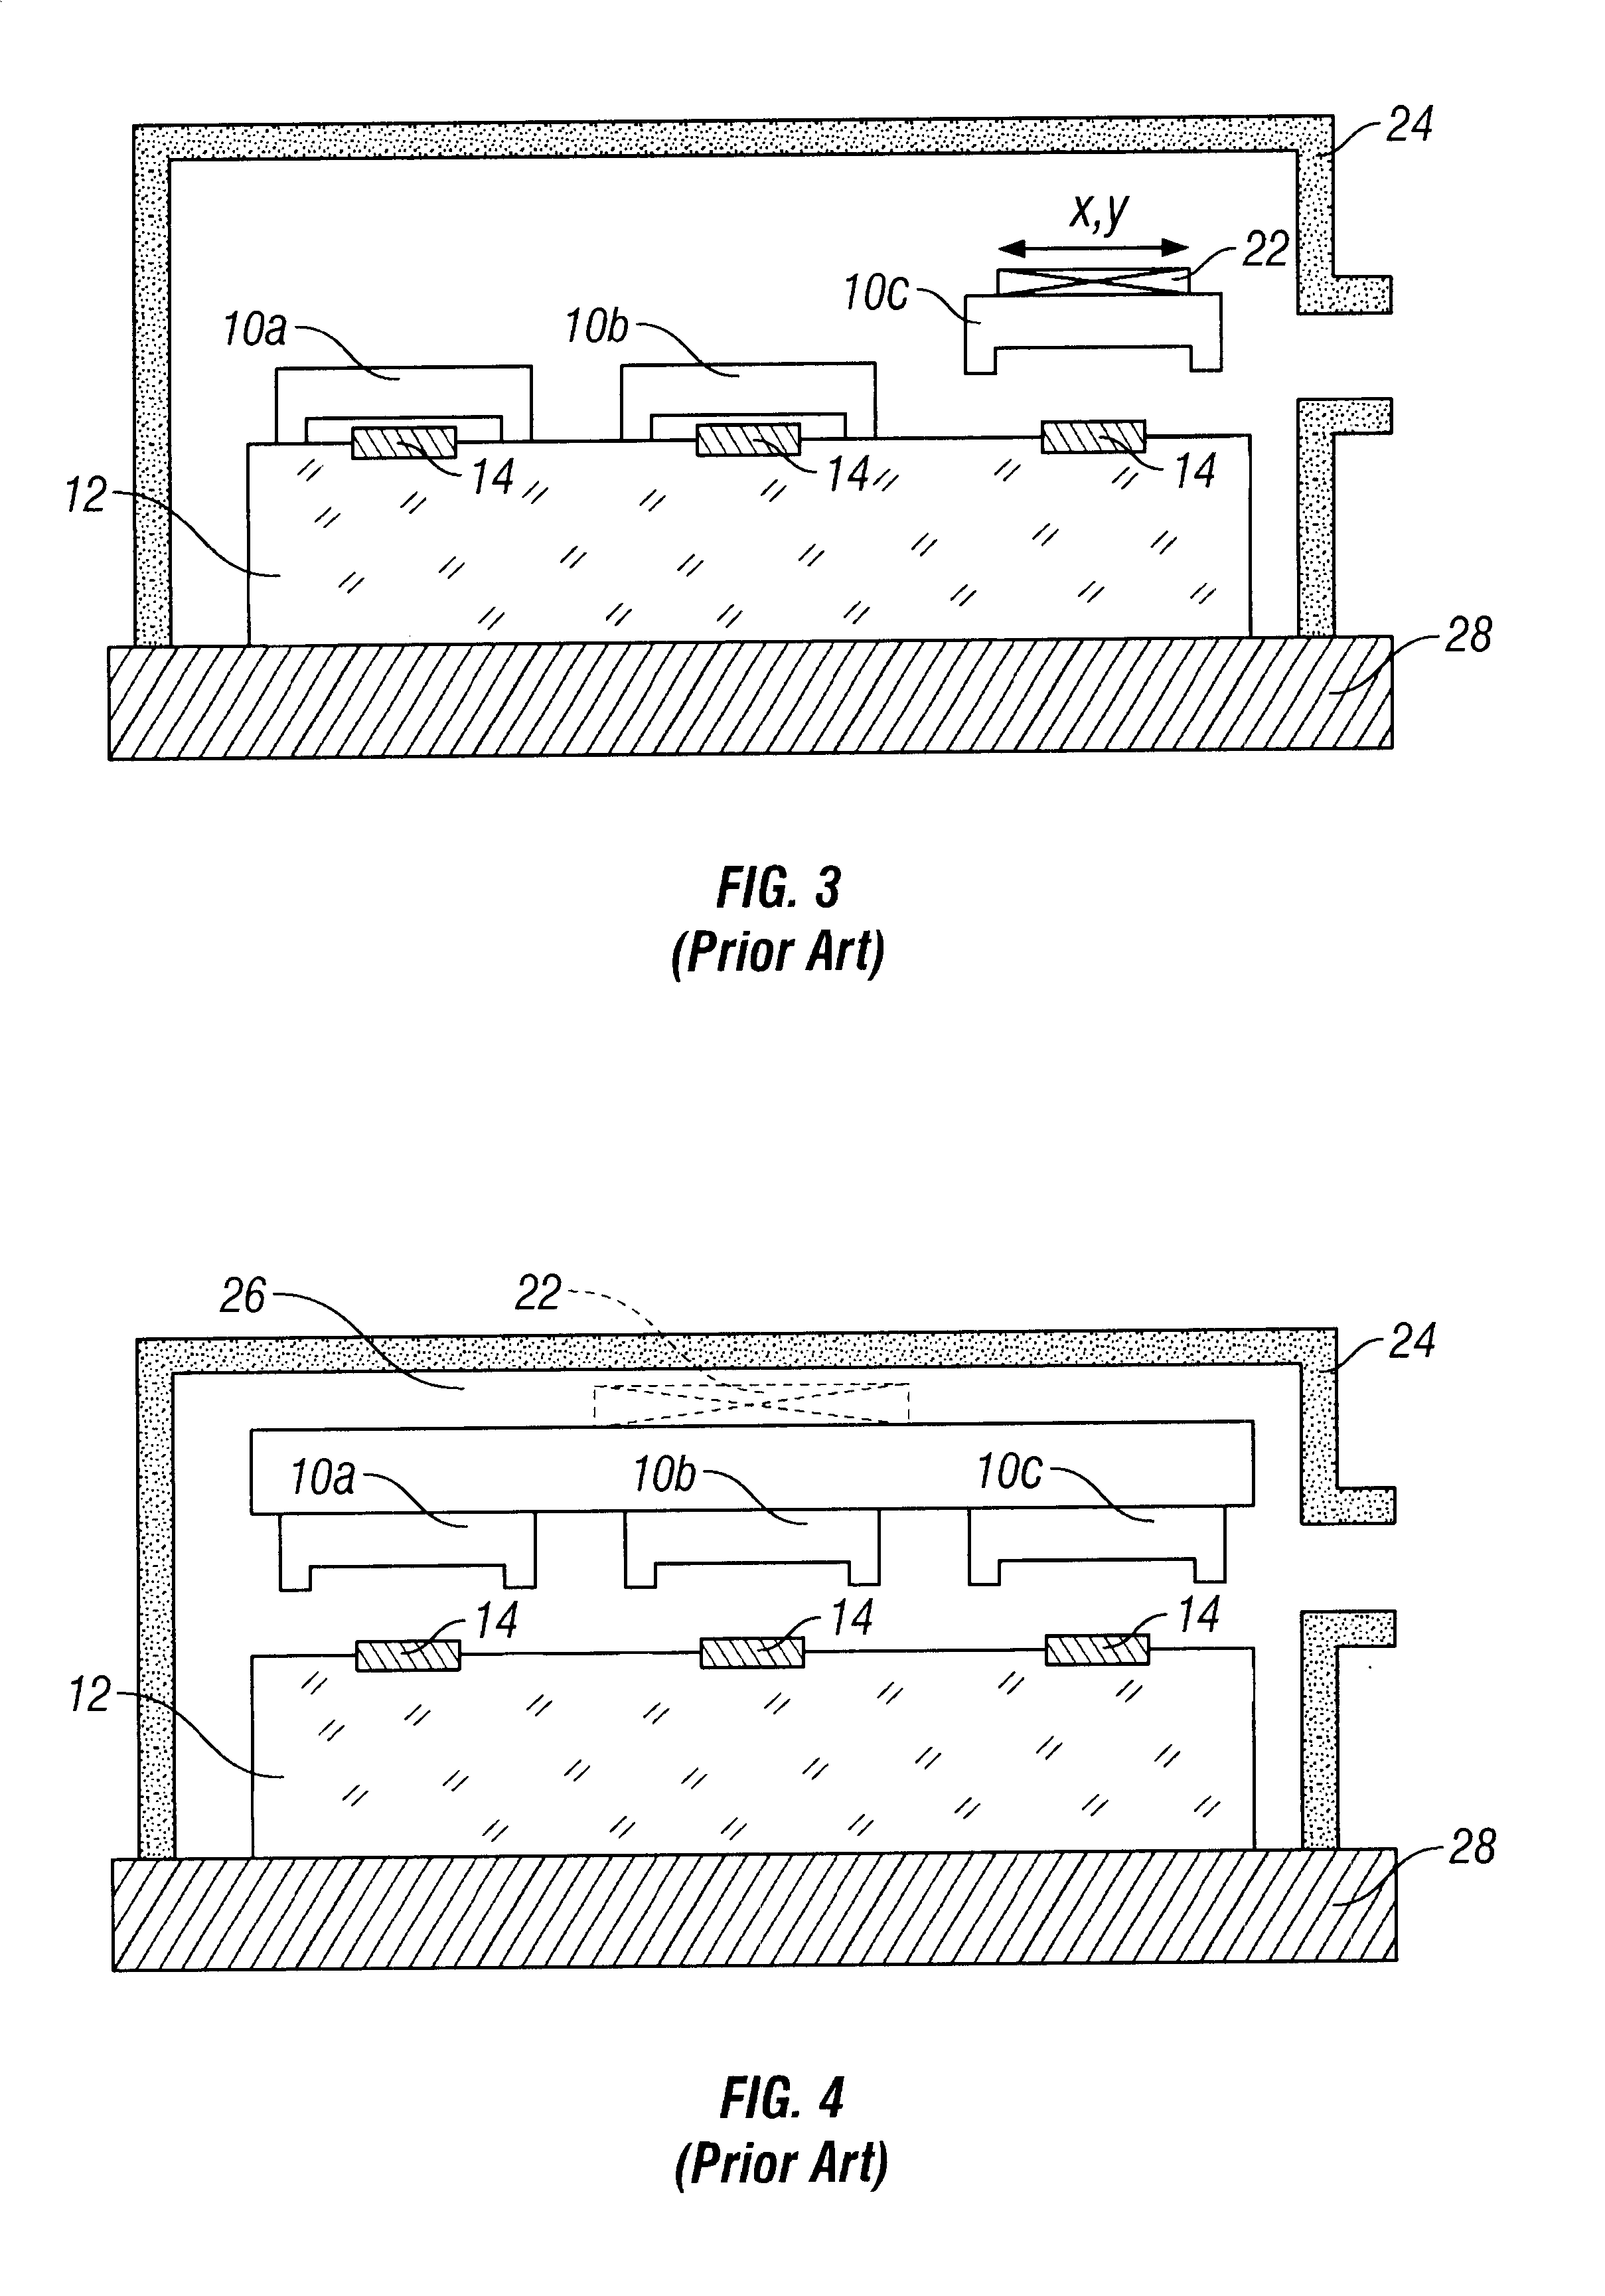 Method for forming a device having a cavity with controlled atmosphere